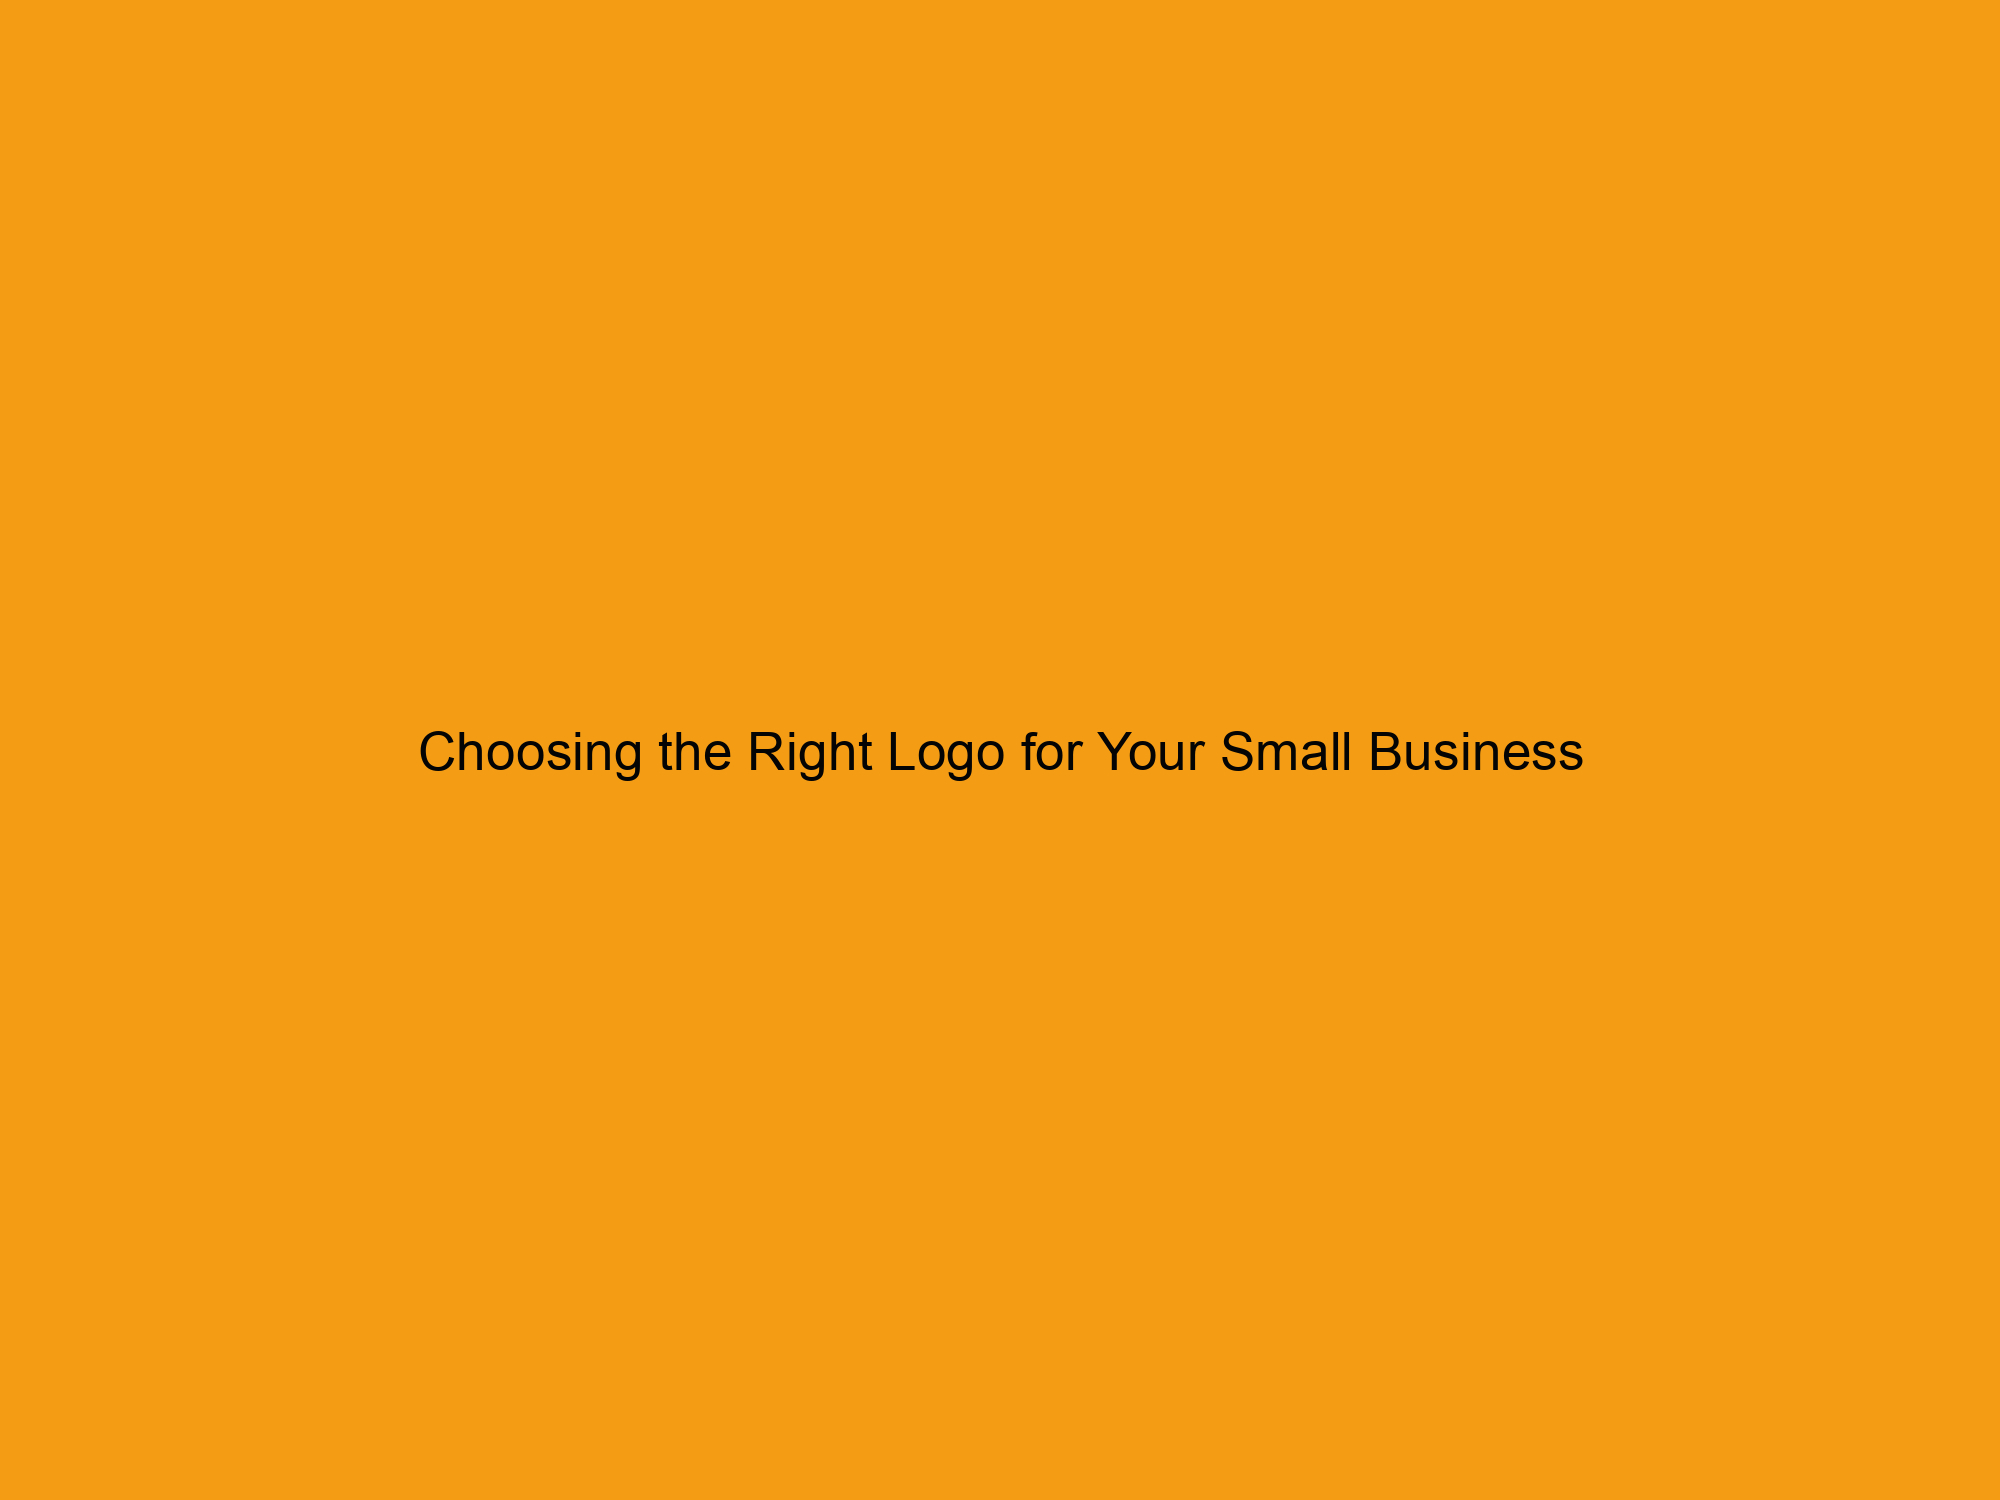 Choosing the Right Logo for Your Small Business